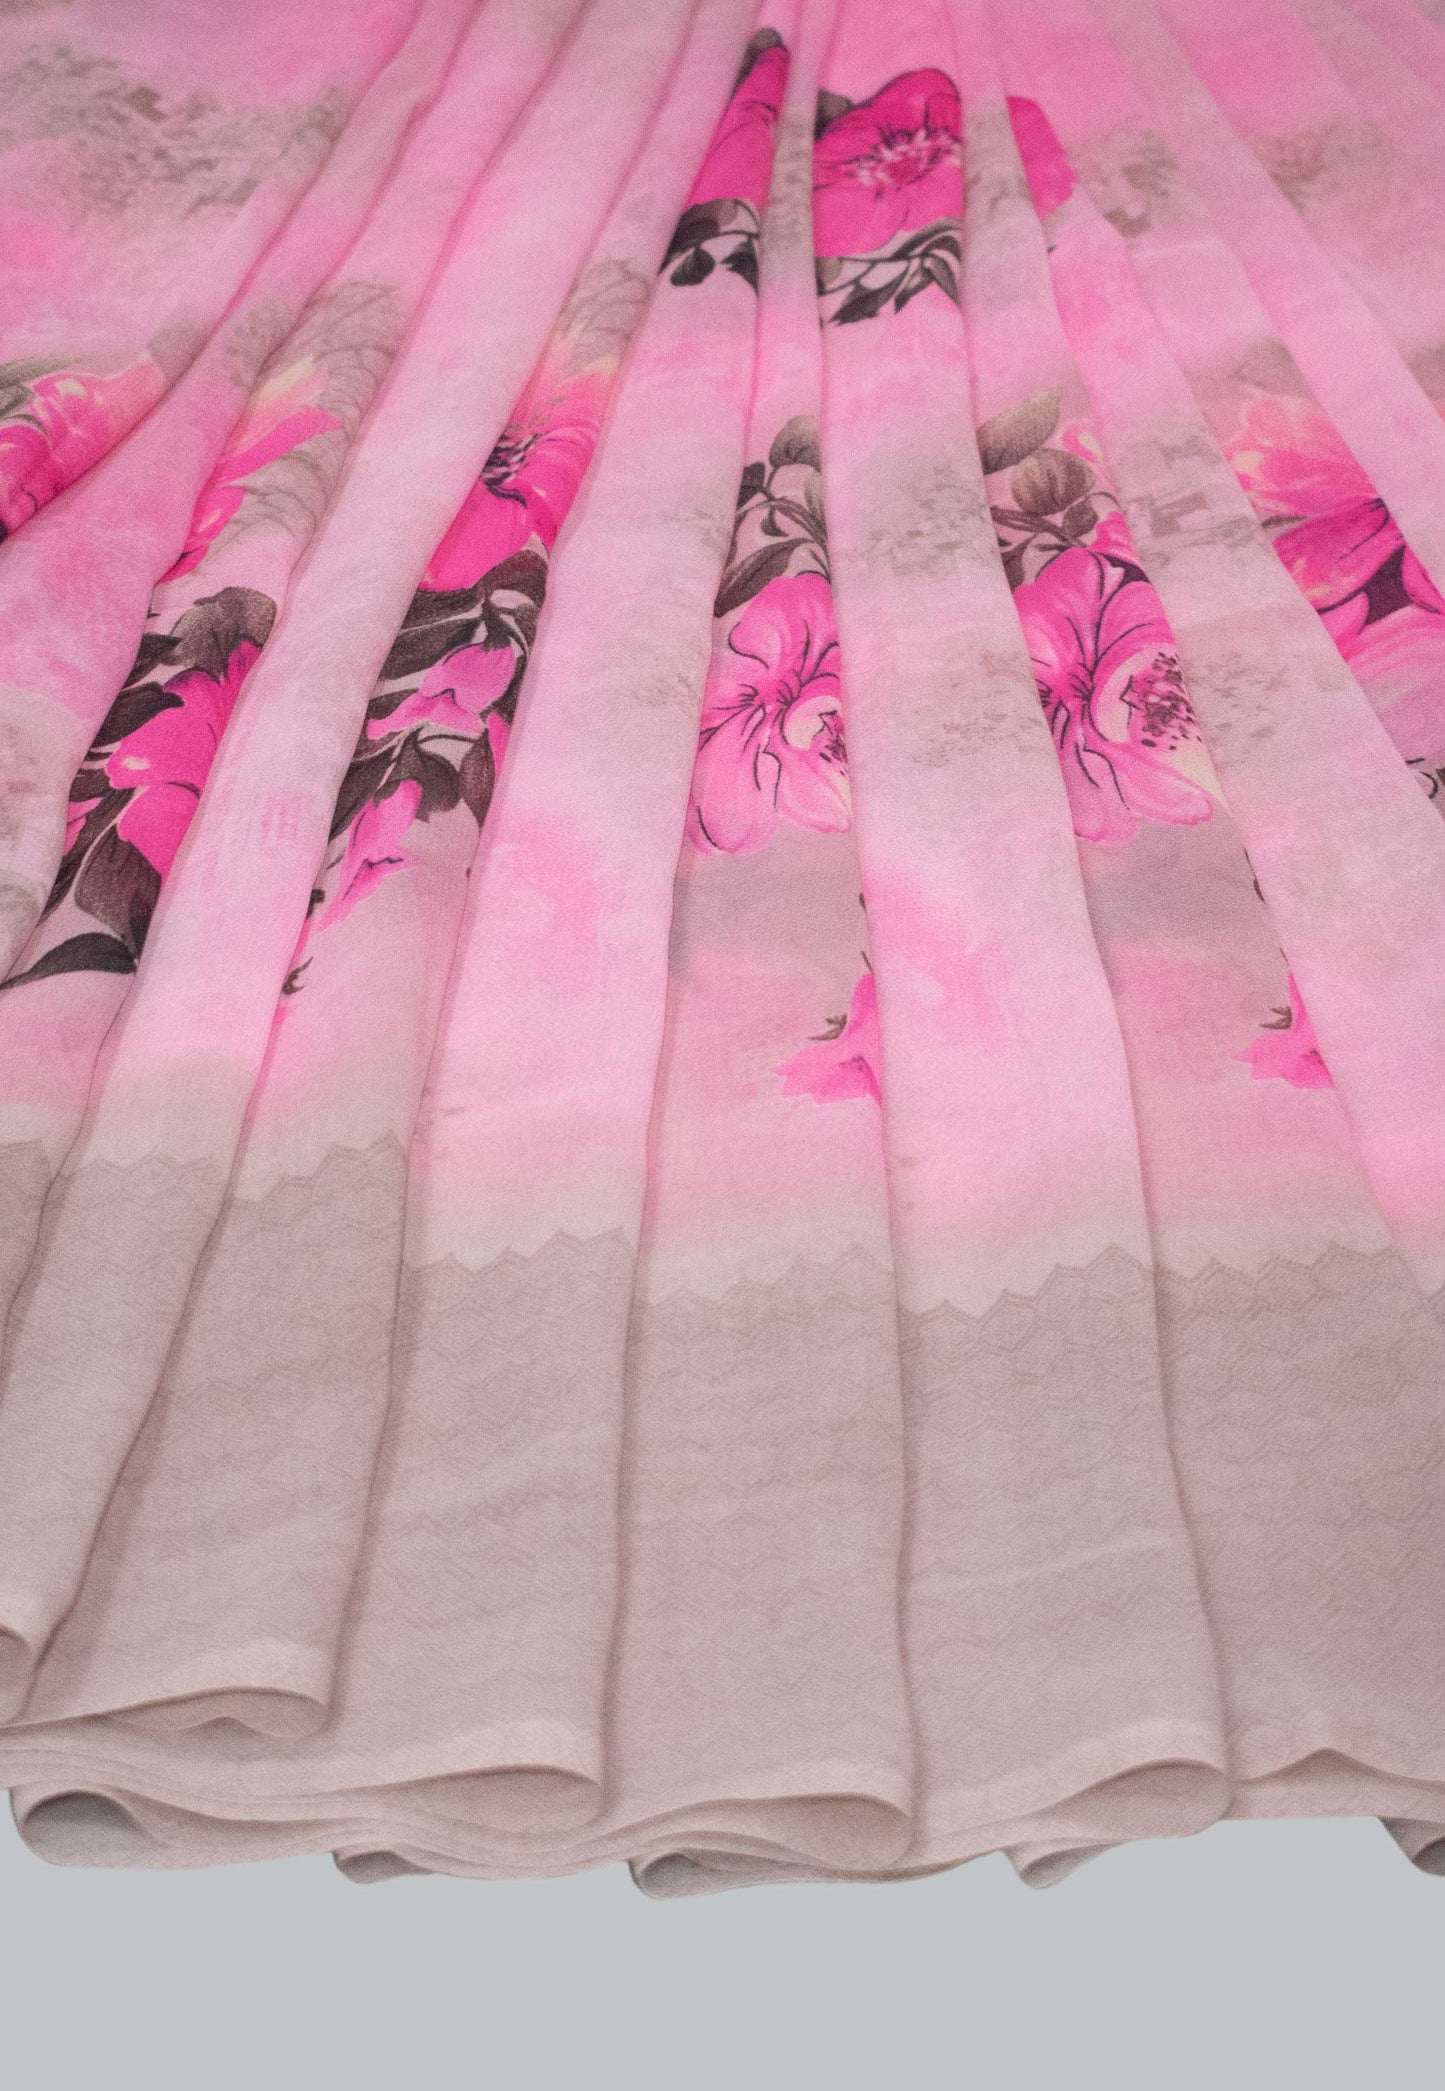 Blush Blooms - Pink Georgette Saree with Delicate Floral Motifs